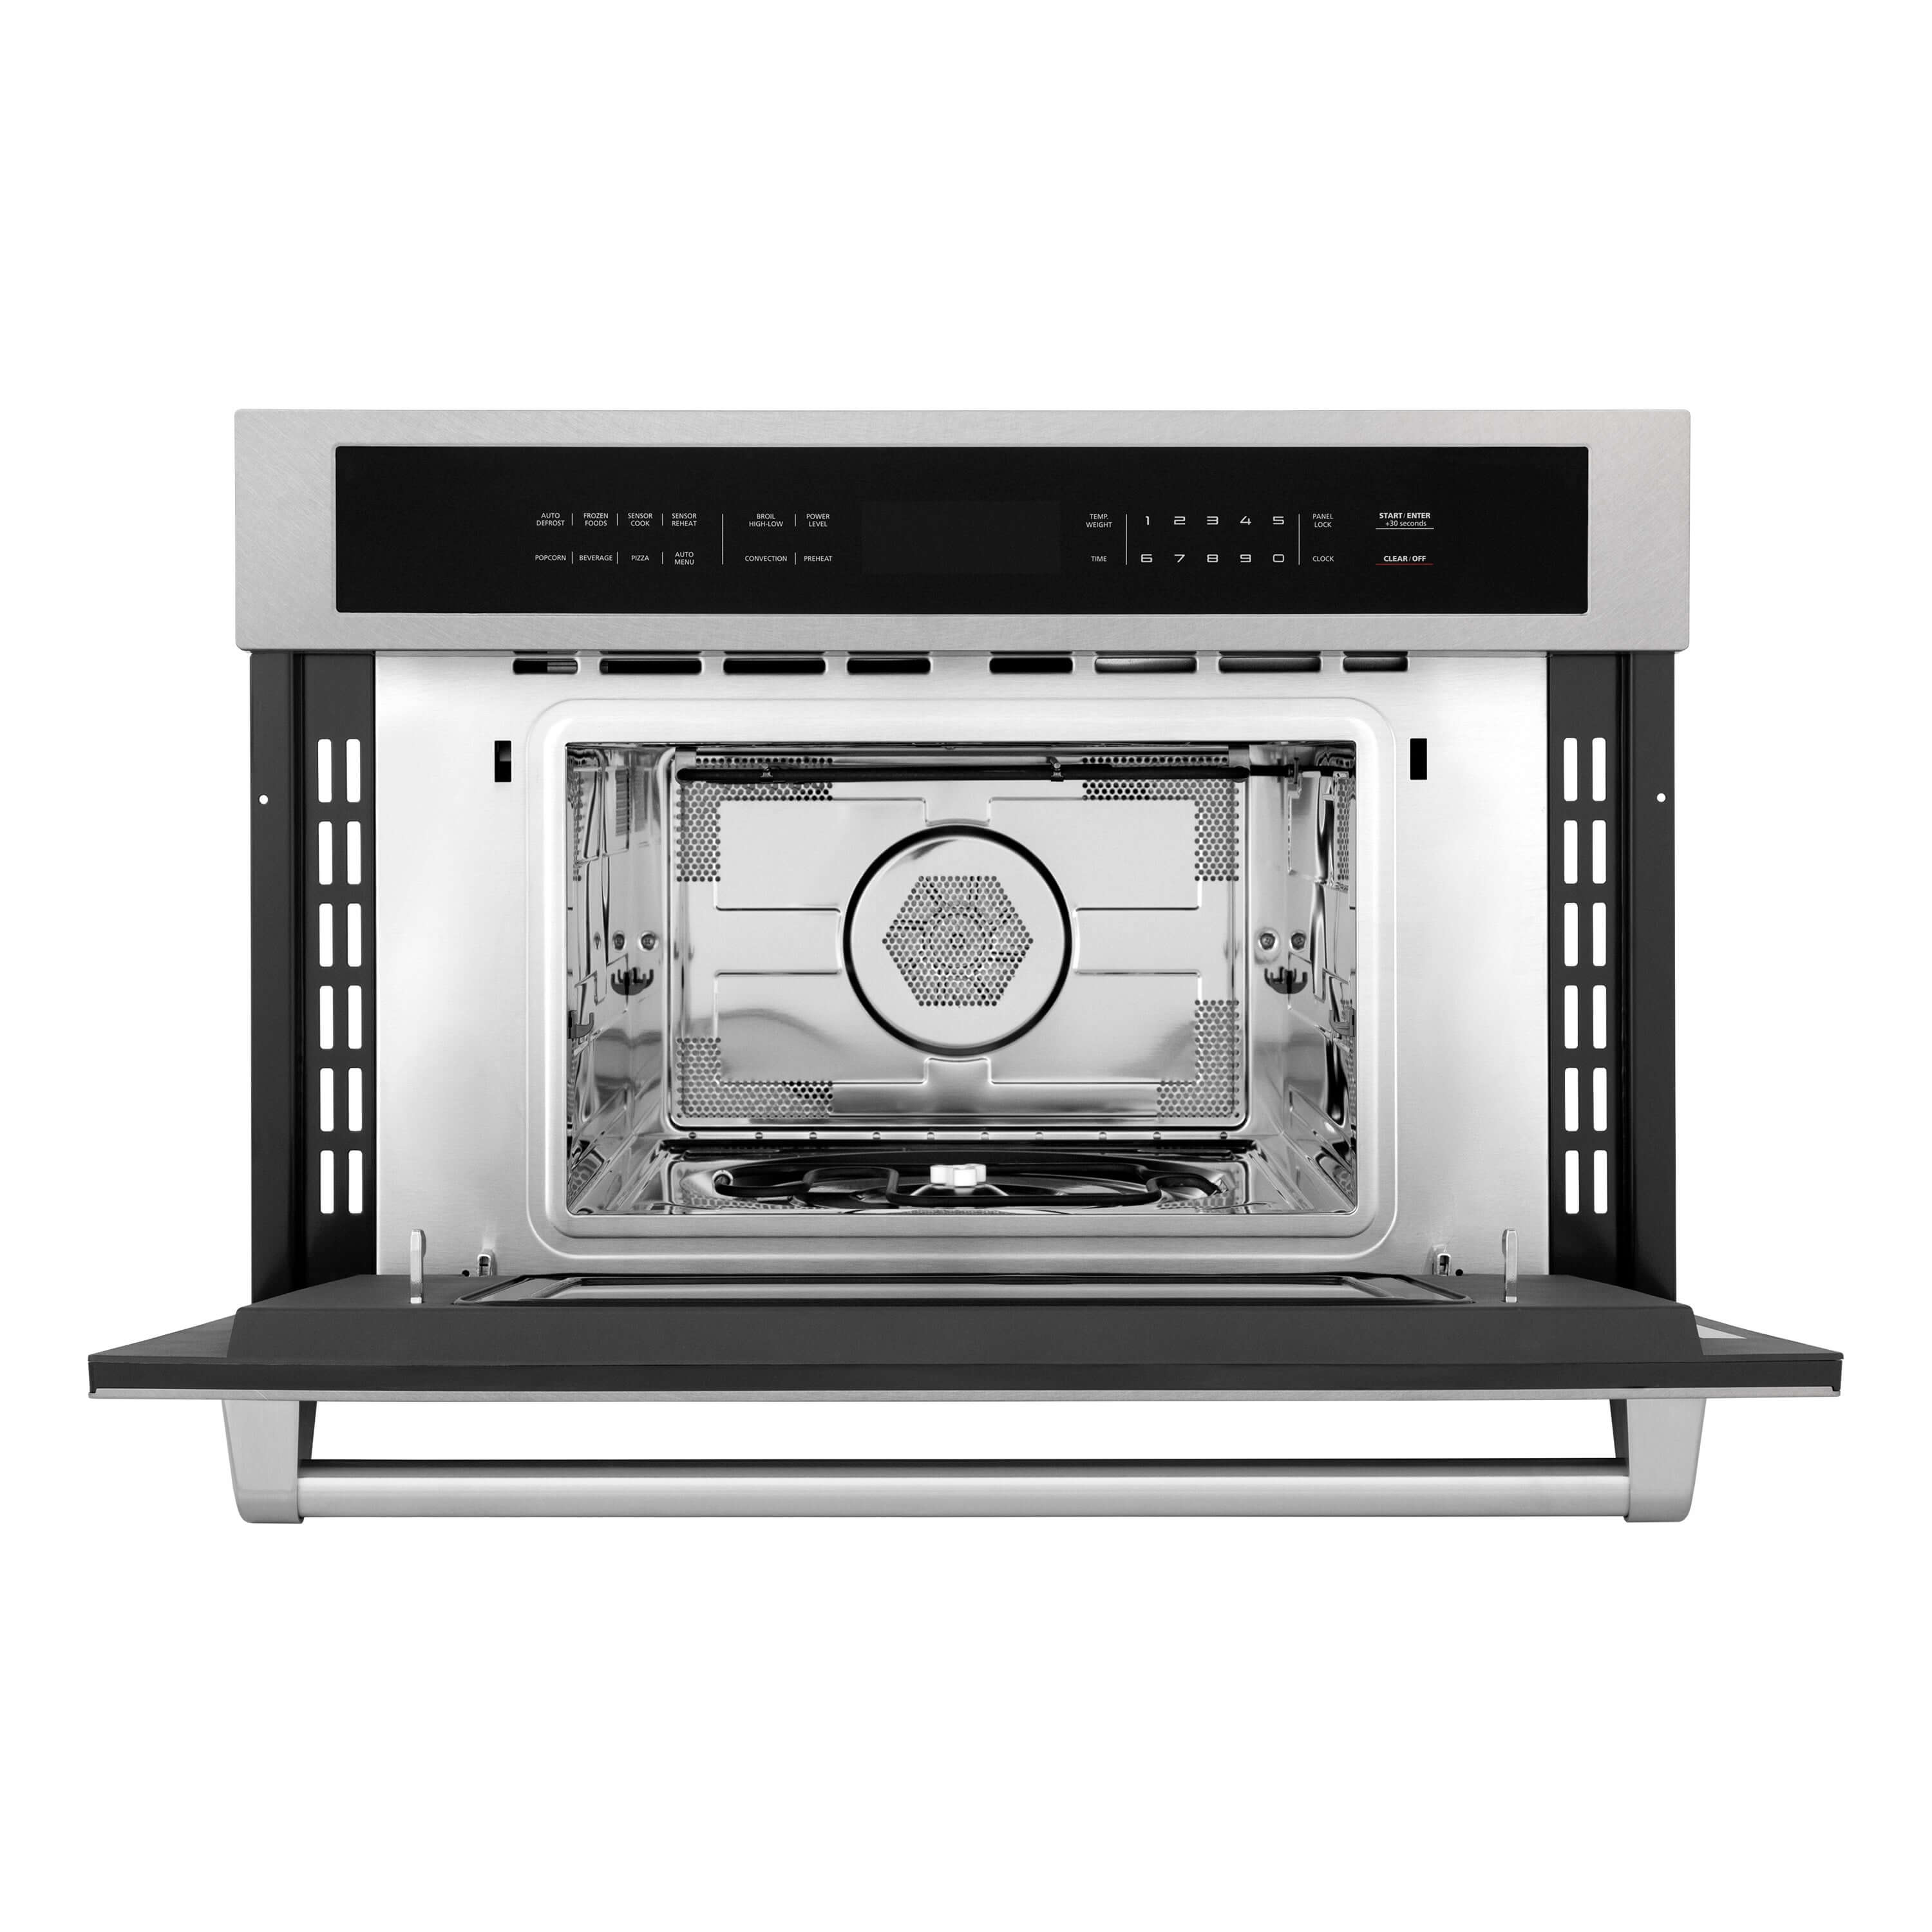 ZLINE 30 in. 1.6 cu ft. Built-in Convection Microwave Oven in Fingerprint Resistant Stainless Steel (MWO-30-SS)